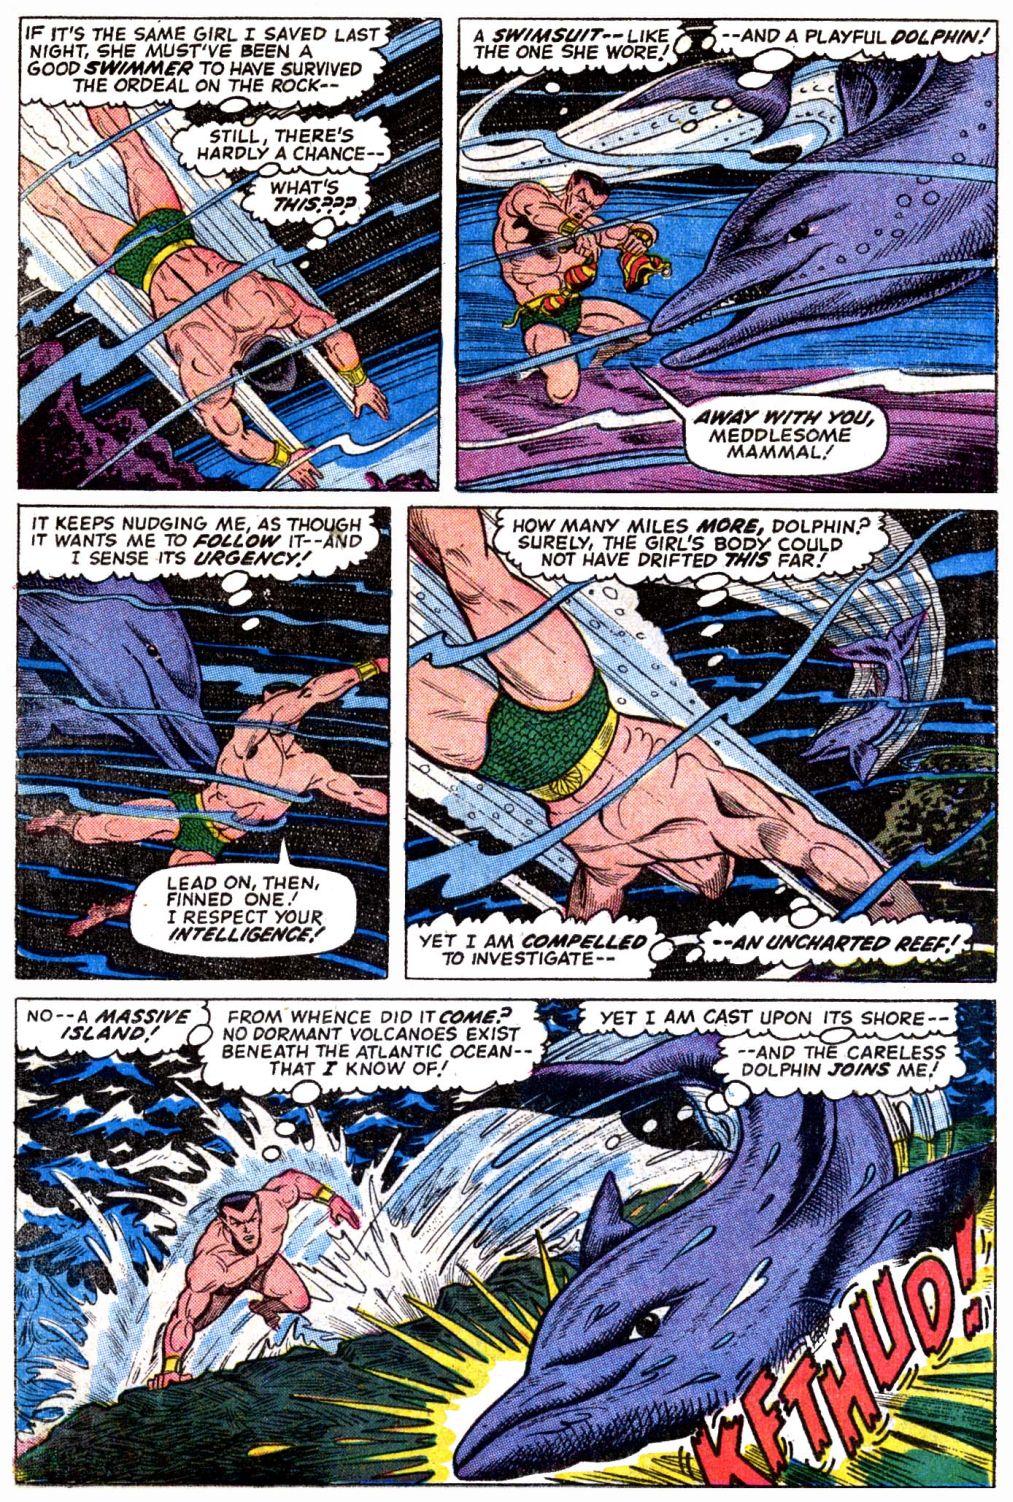 Read online The Sub-Mariner comic -  Issue #57 - 14